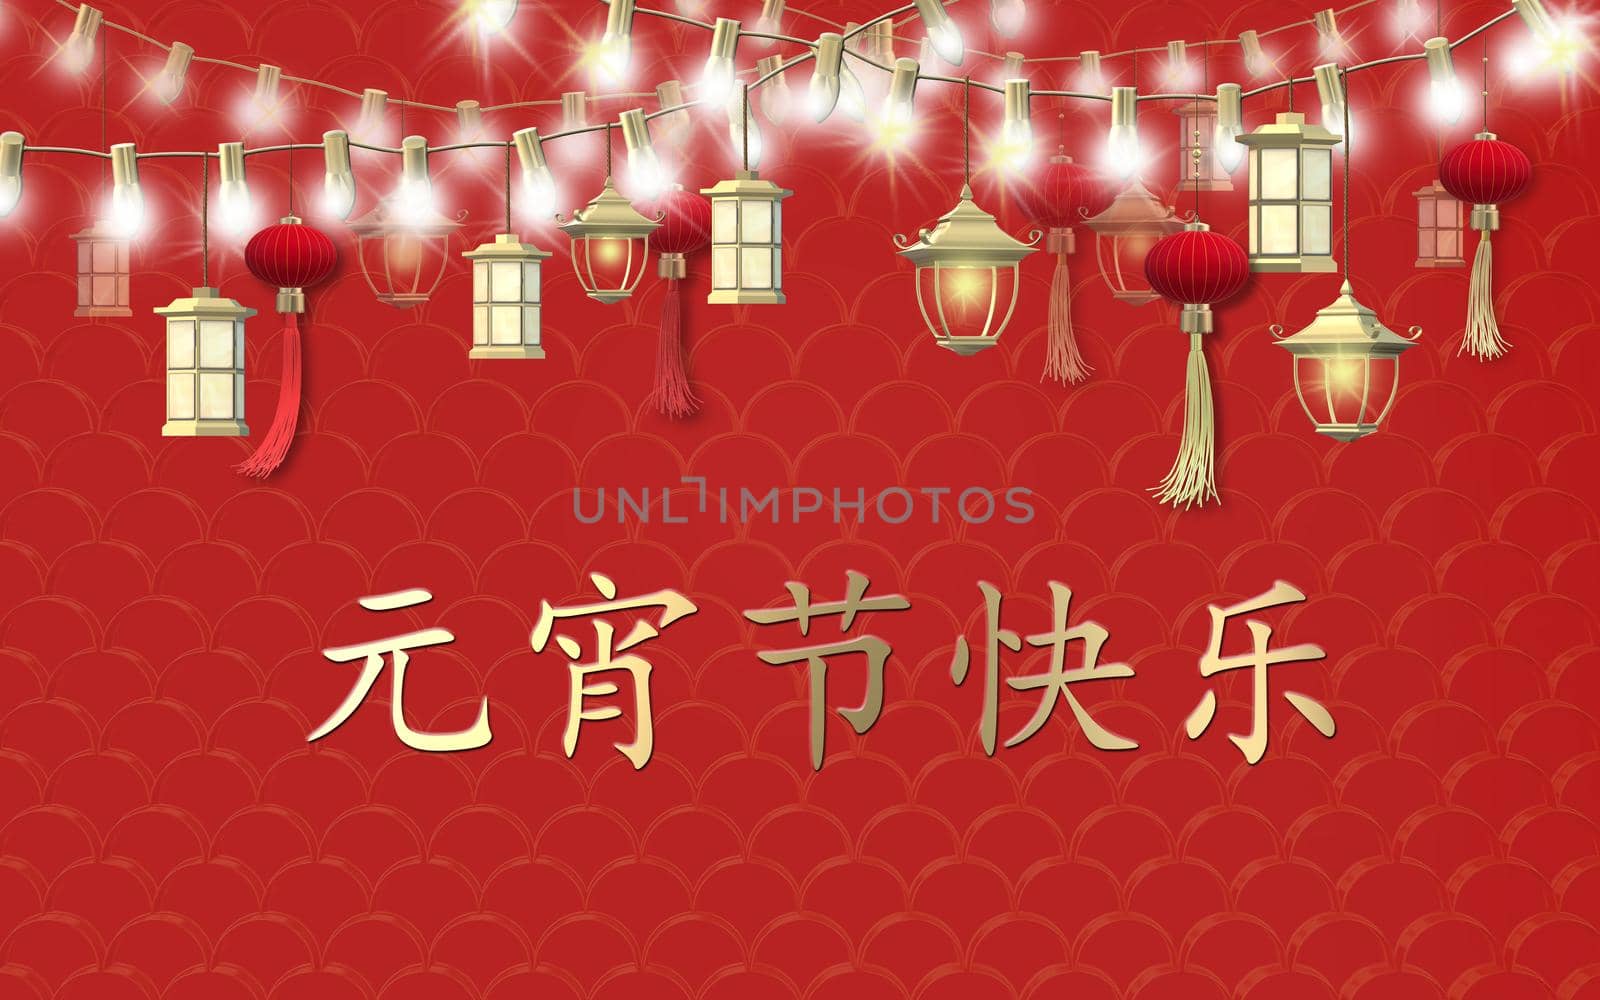 Happy Lantern festival. Spring Chinese festival design. Chinese text Happy Lantern festival. Oriental Asian traditional lanterns on string of lights on red background. Place for text, 3D illustration